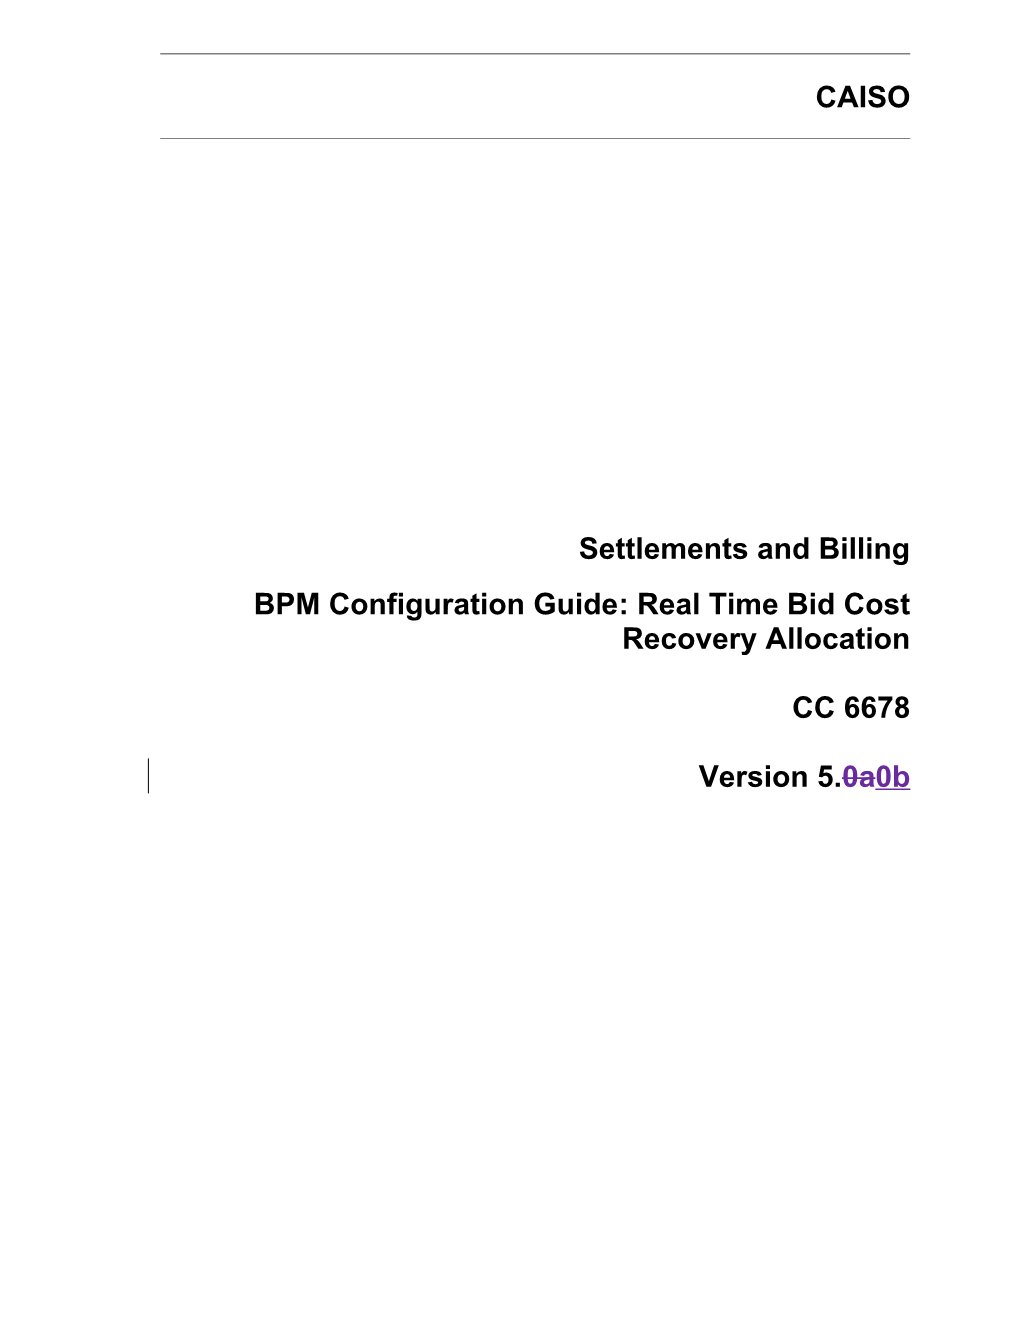 Real Time Bid Cost Recovery Allocation